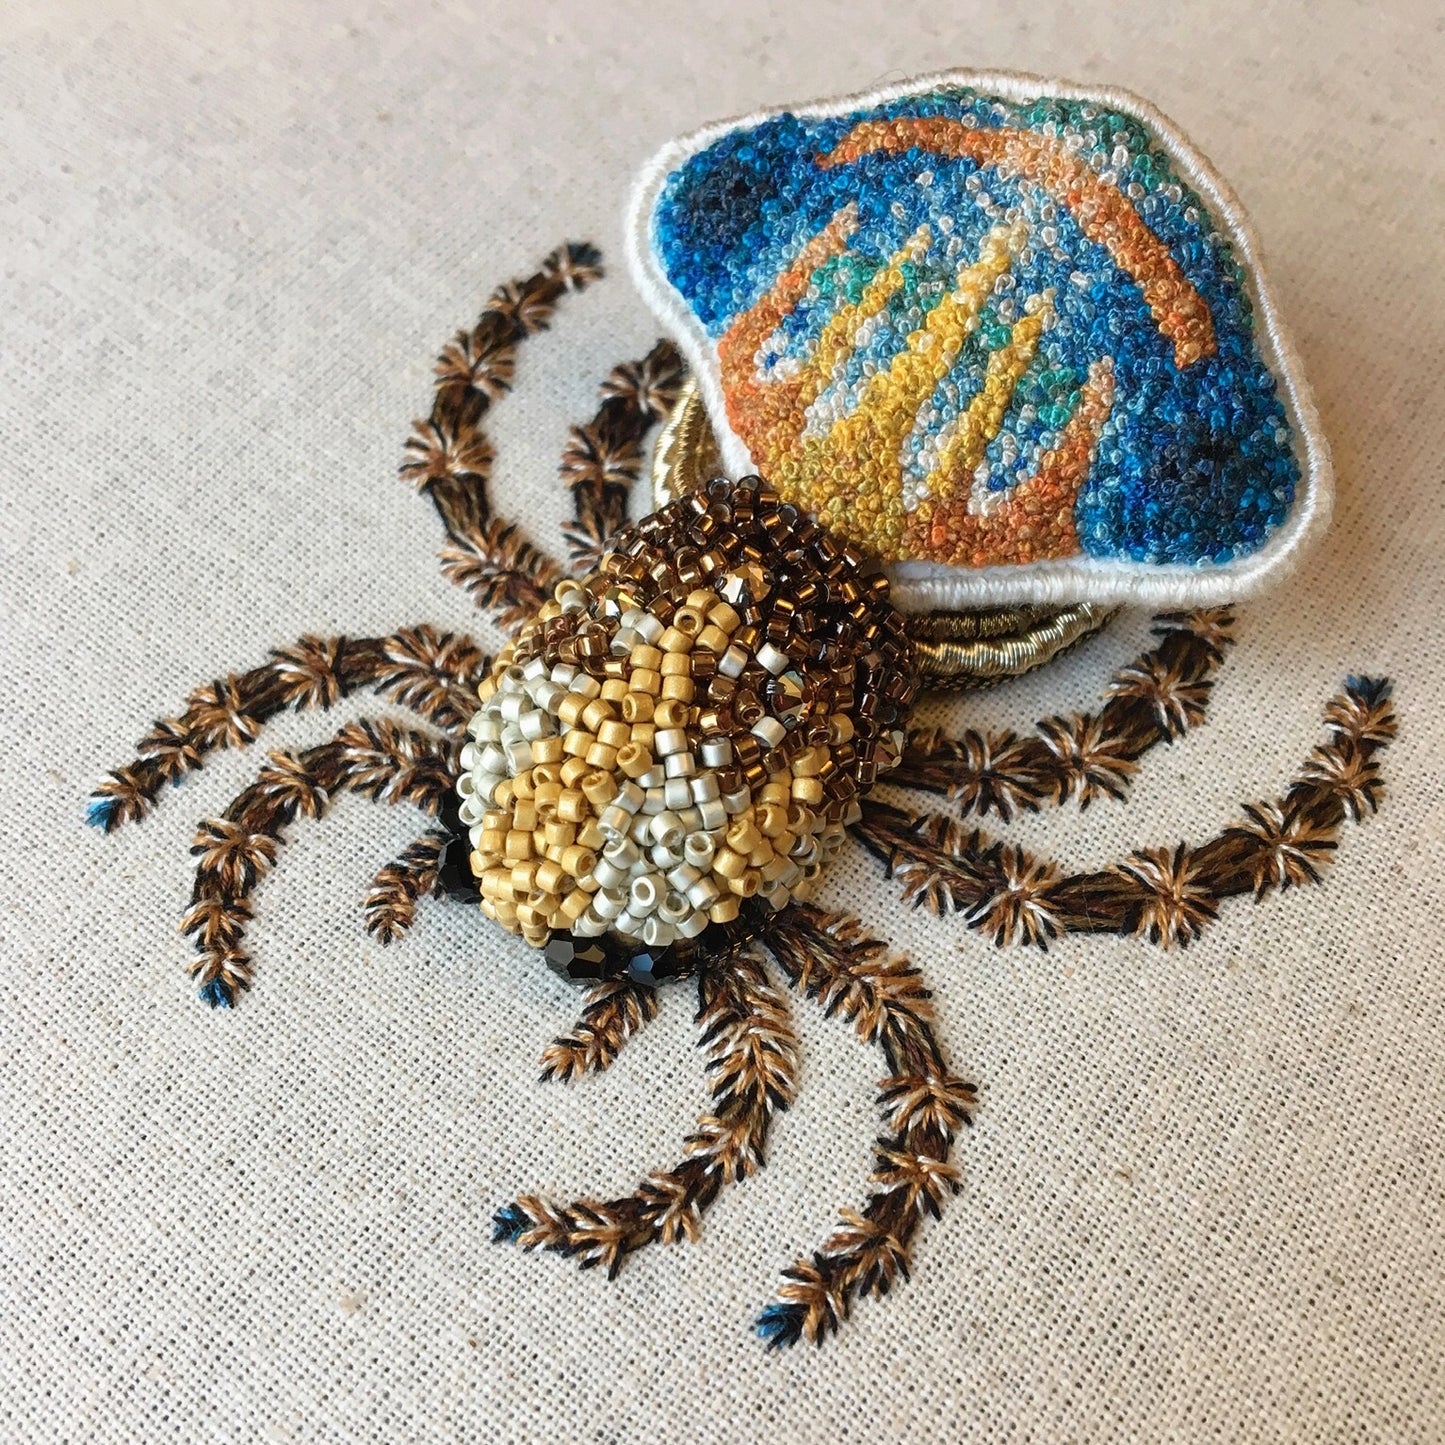 Peacock Spider Embroidered Artwork